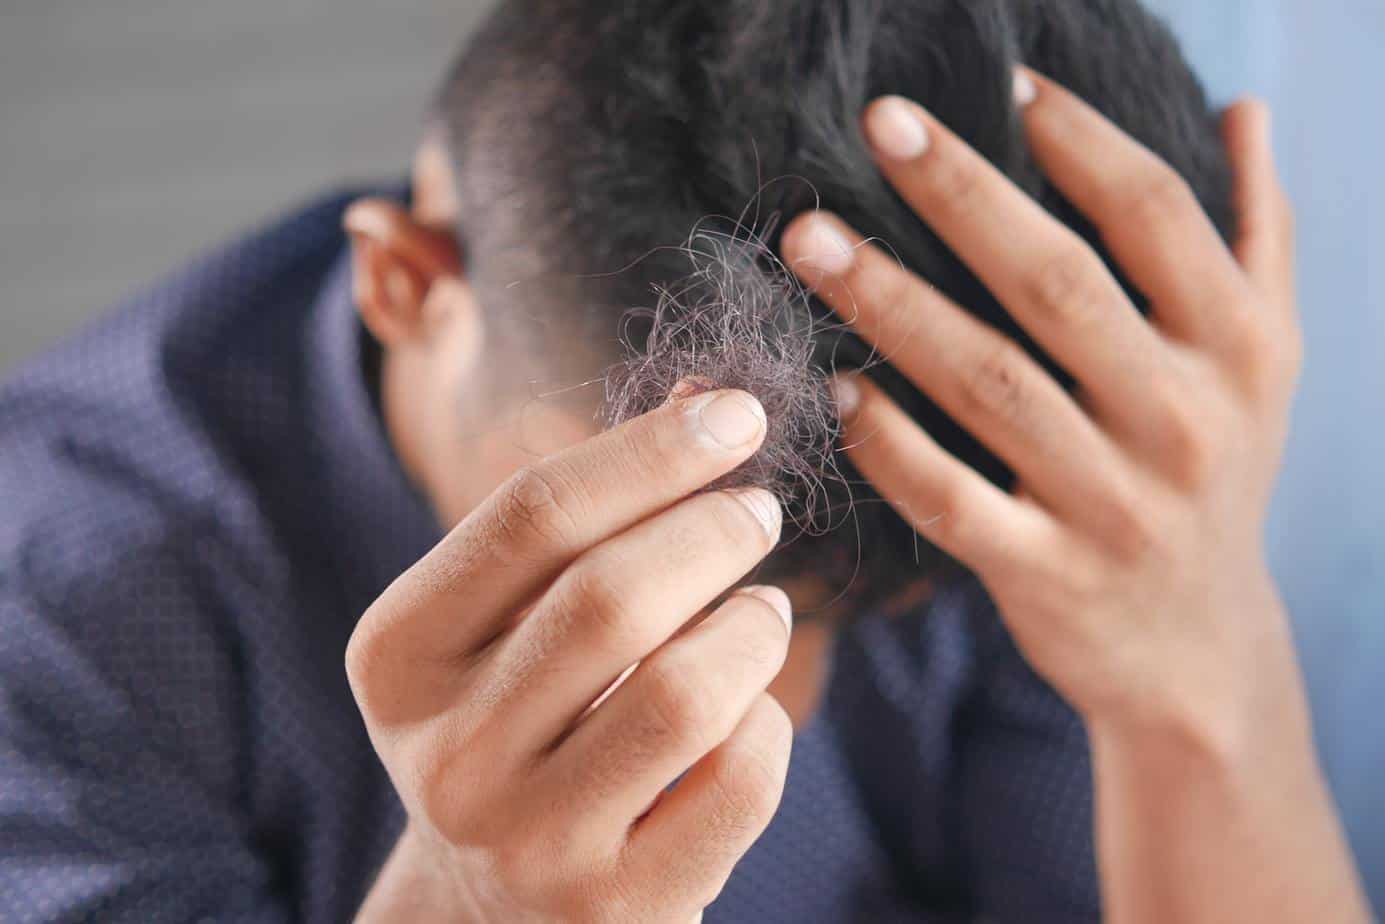 Causes of excessive hair loss